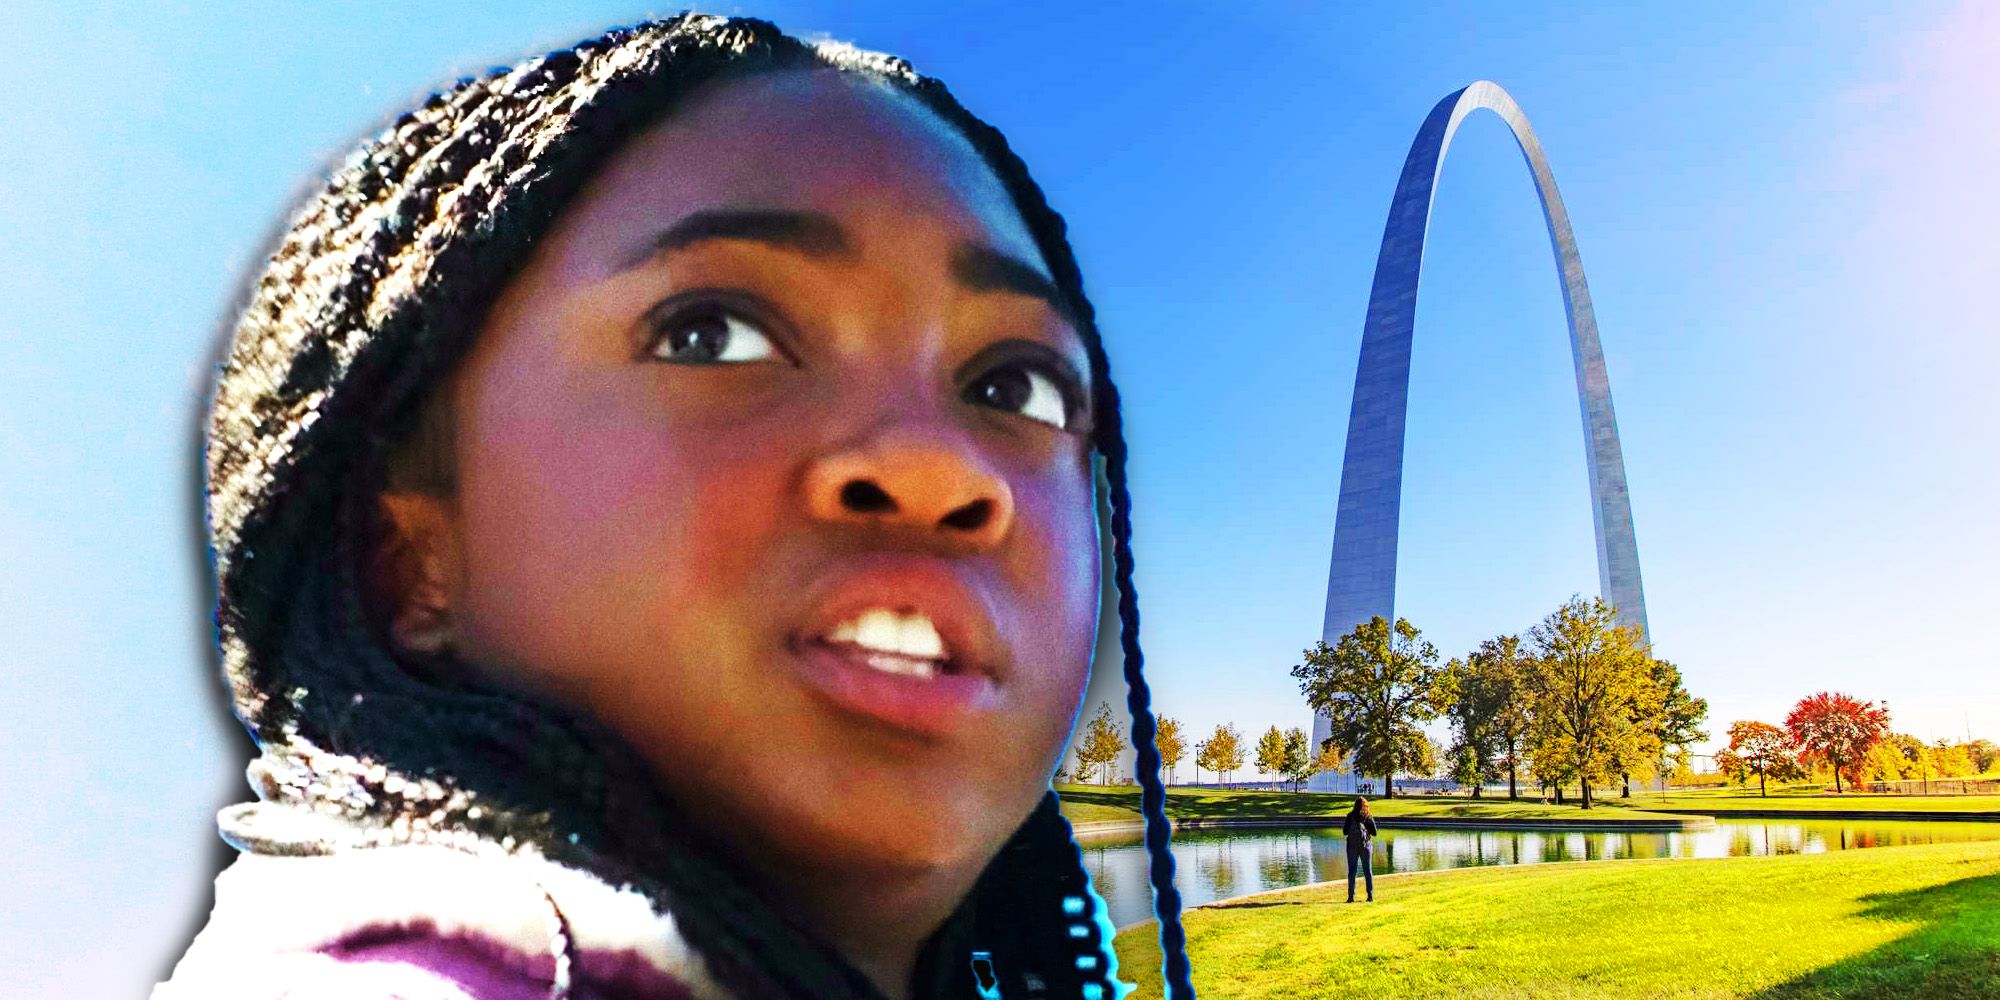 A split image of Leah Jeffries in Percy Jackson & the Olympians and the St. Louis Gateway Arch